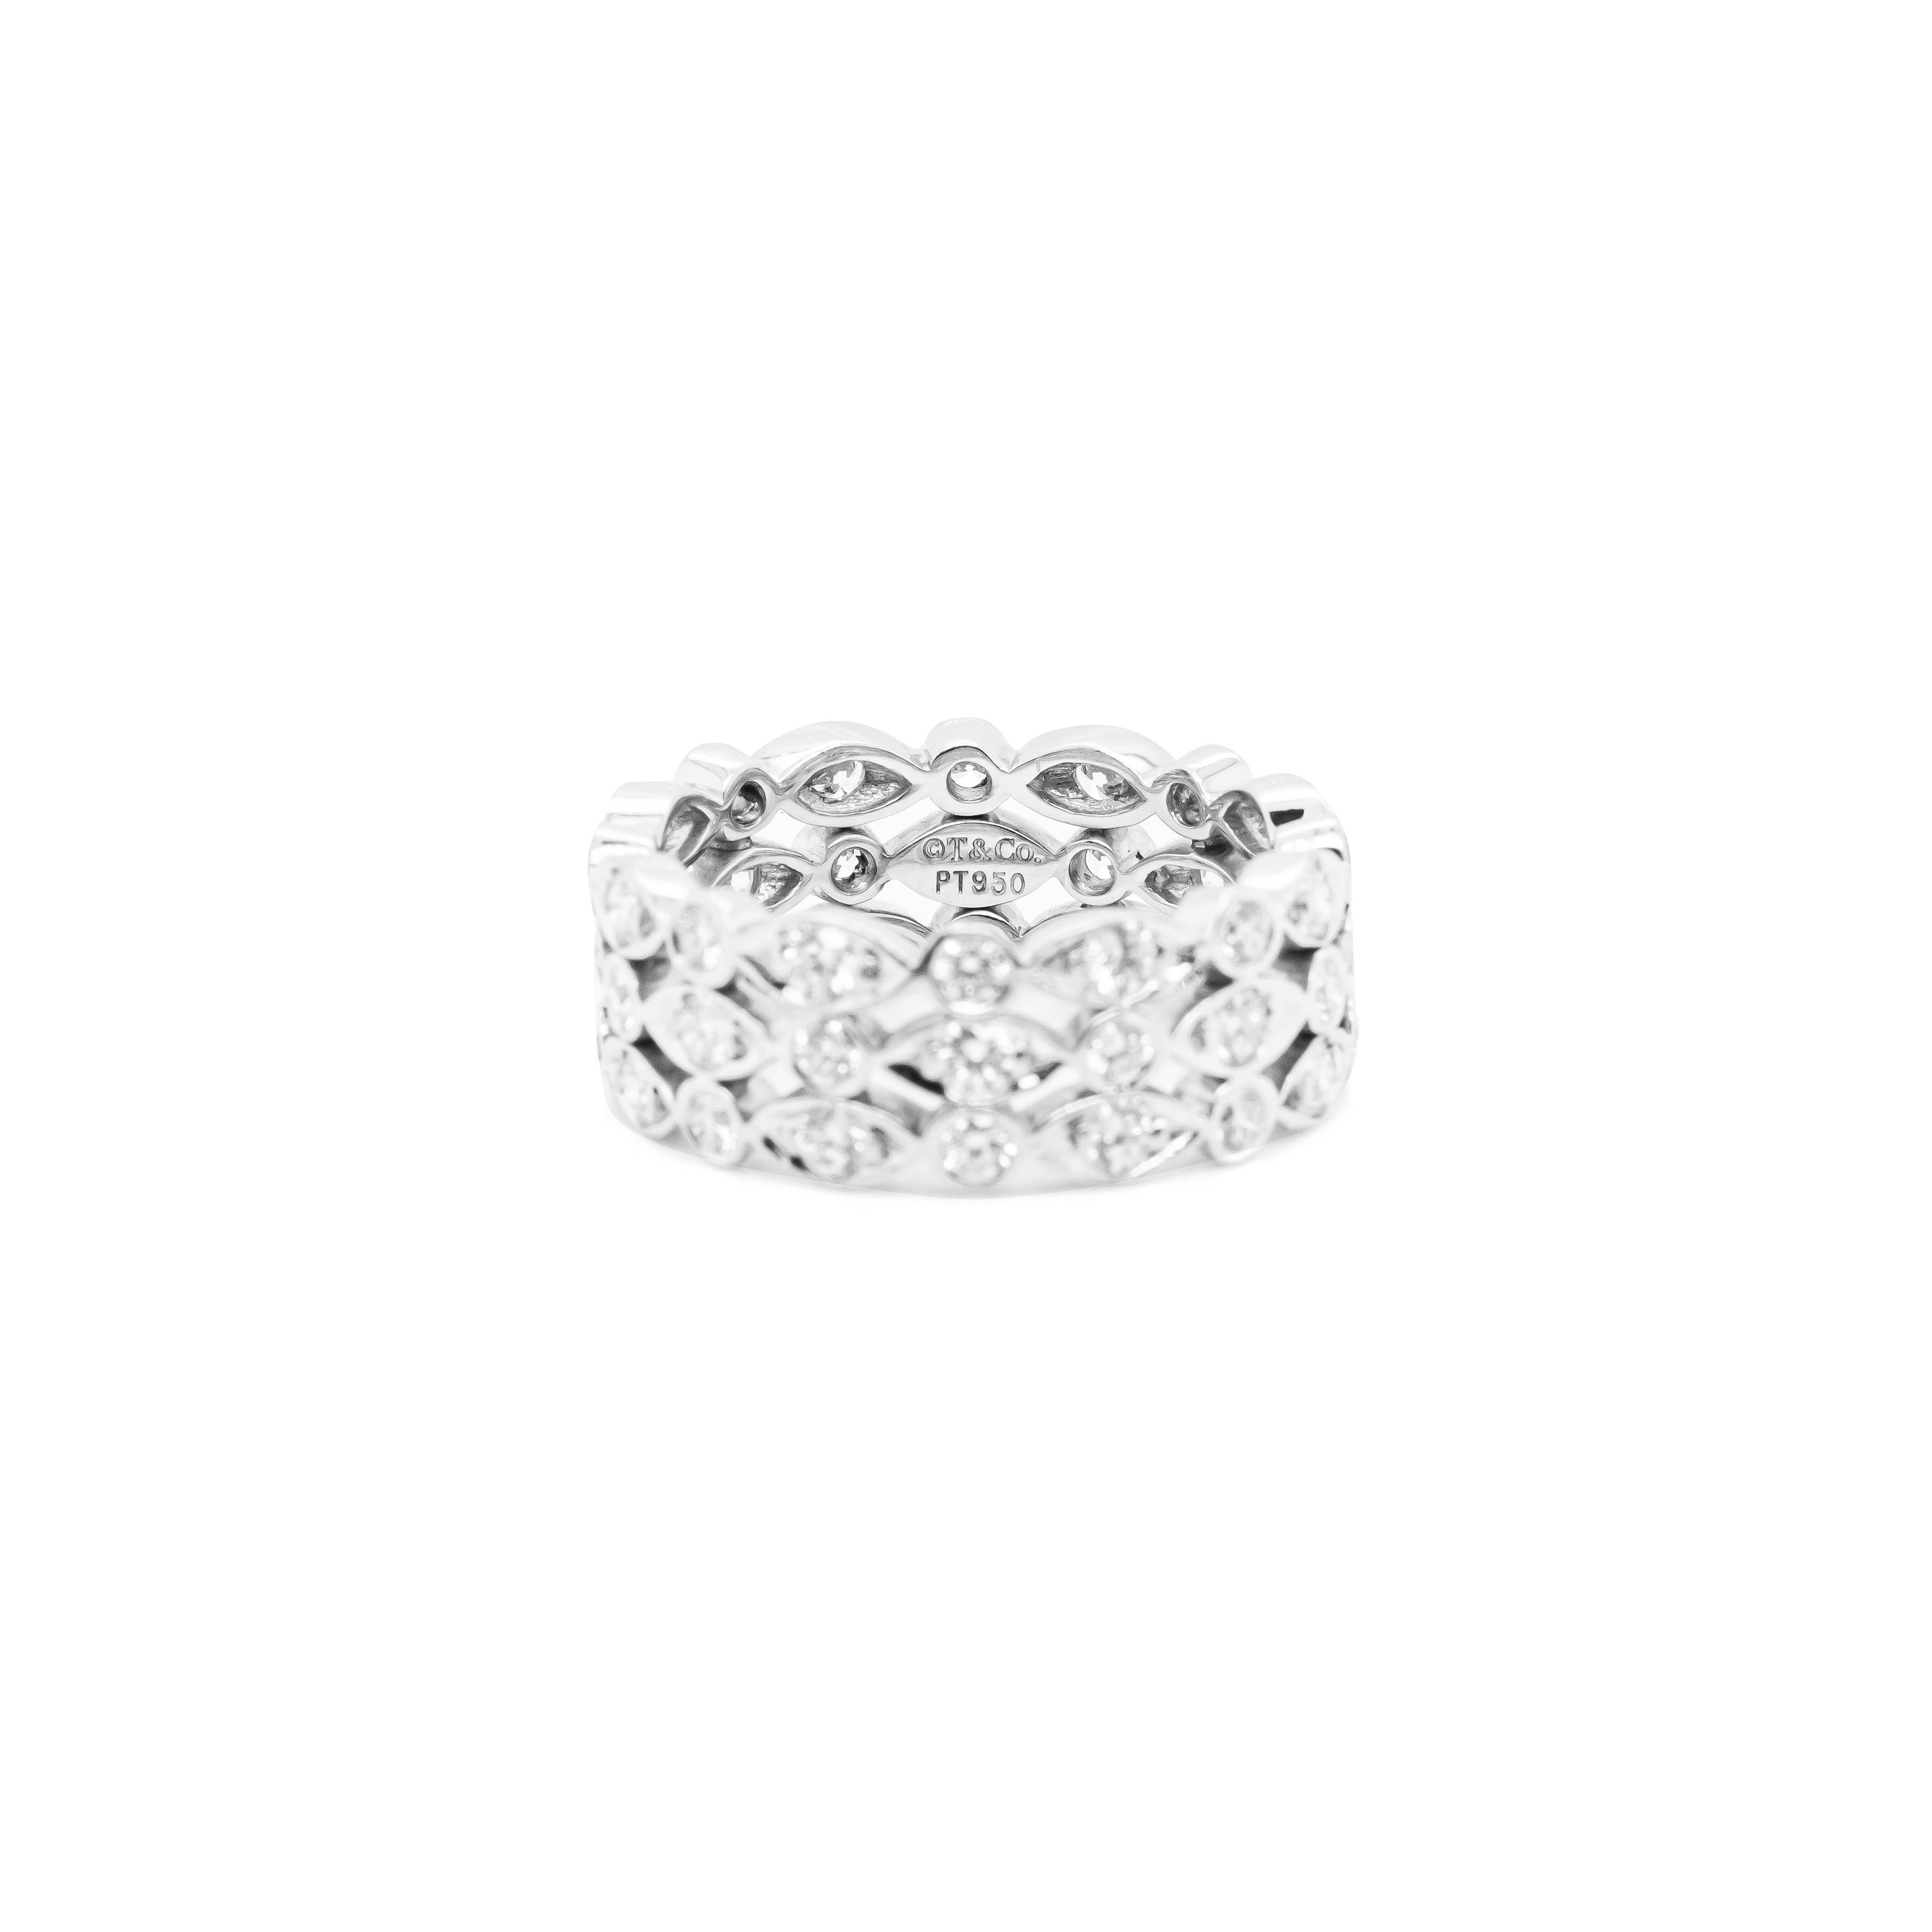 This beautiful ring designed by Tiffany&Co features three rows of alternating round and marquise shaped settings each inlaid with a round brilliant cut diamond. There are a total of 48 diamonds that come to an approximate weight of 1.45 carats all